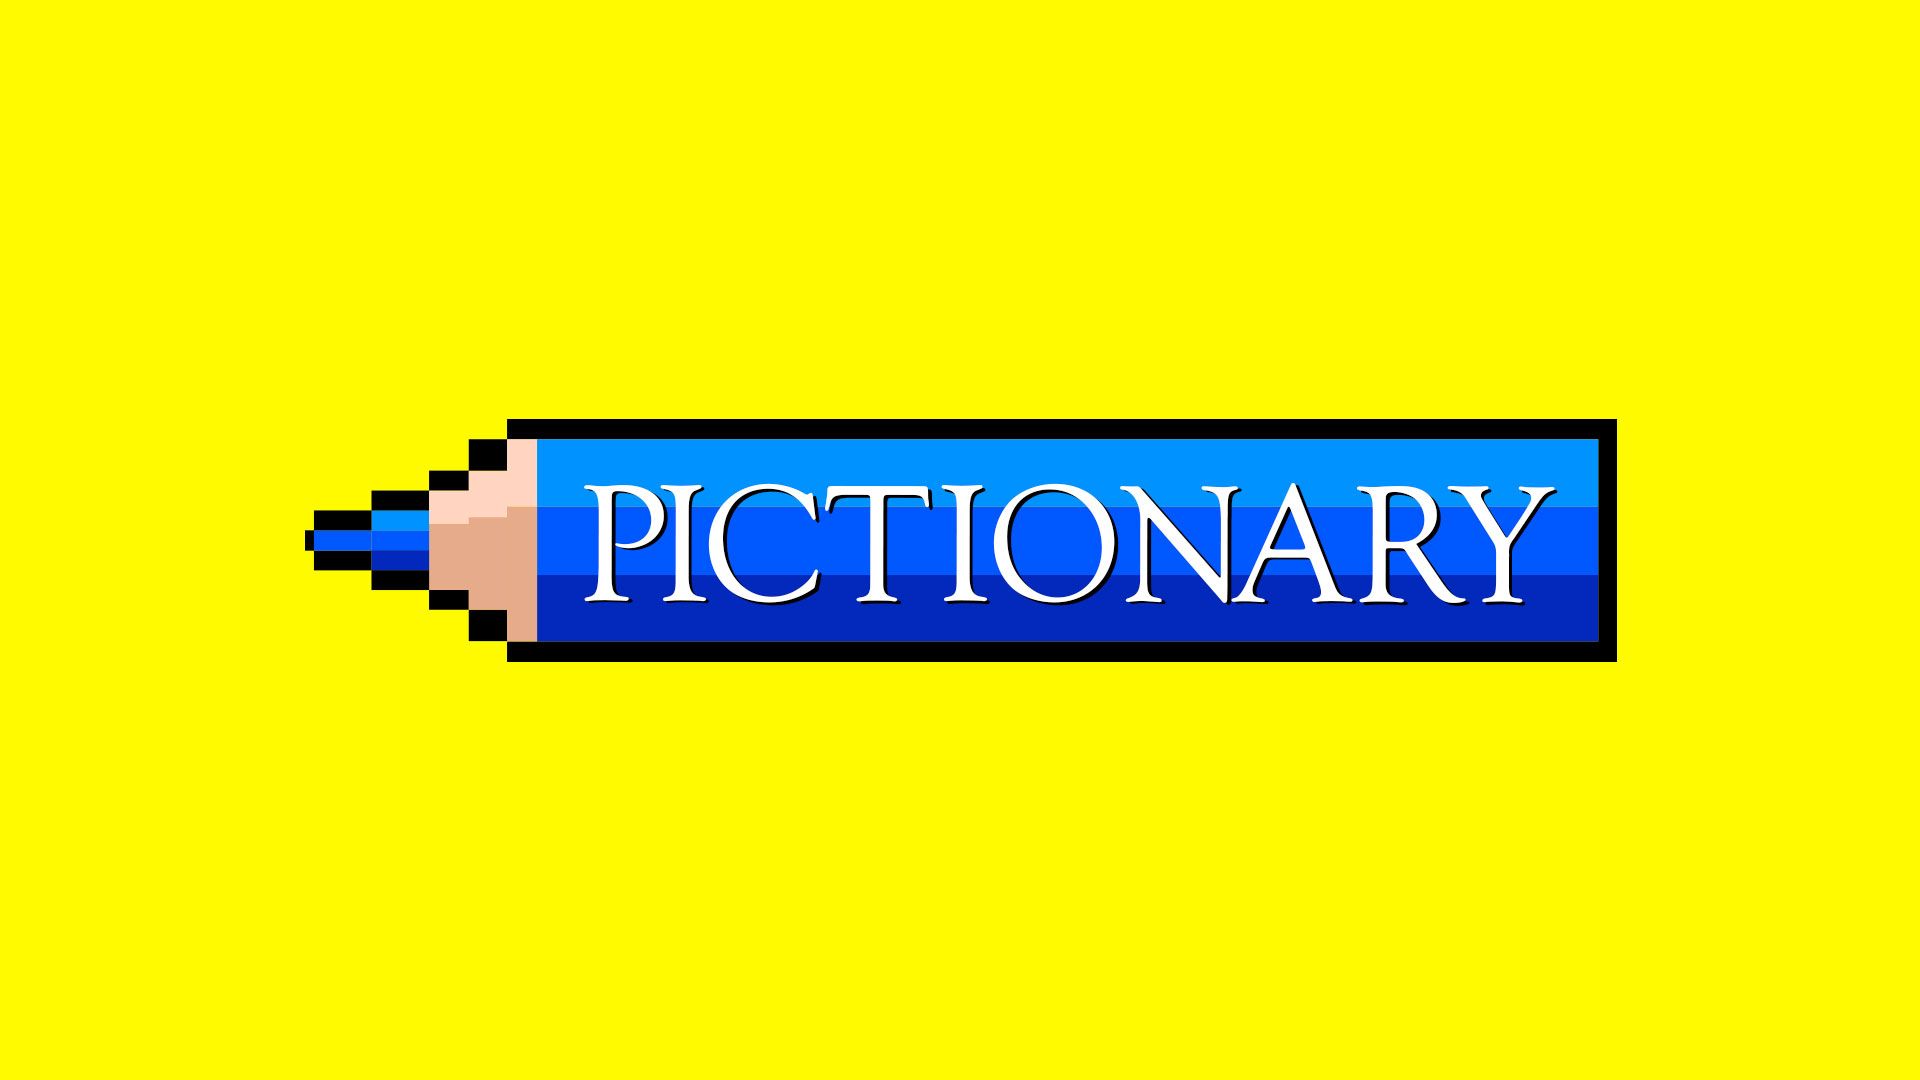 Illustration of the Pictionary logo on top of a pixel art style pencil.